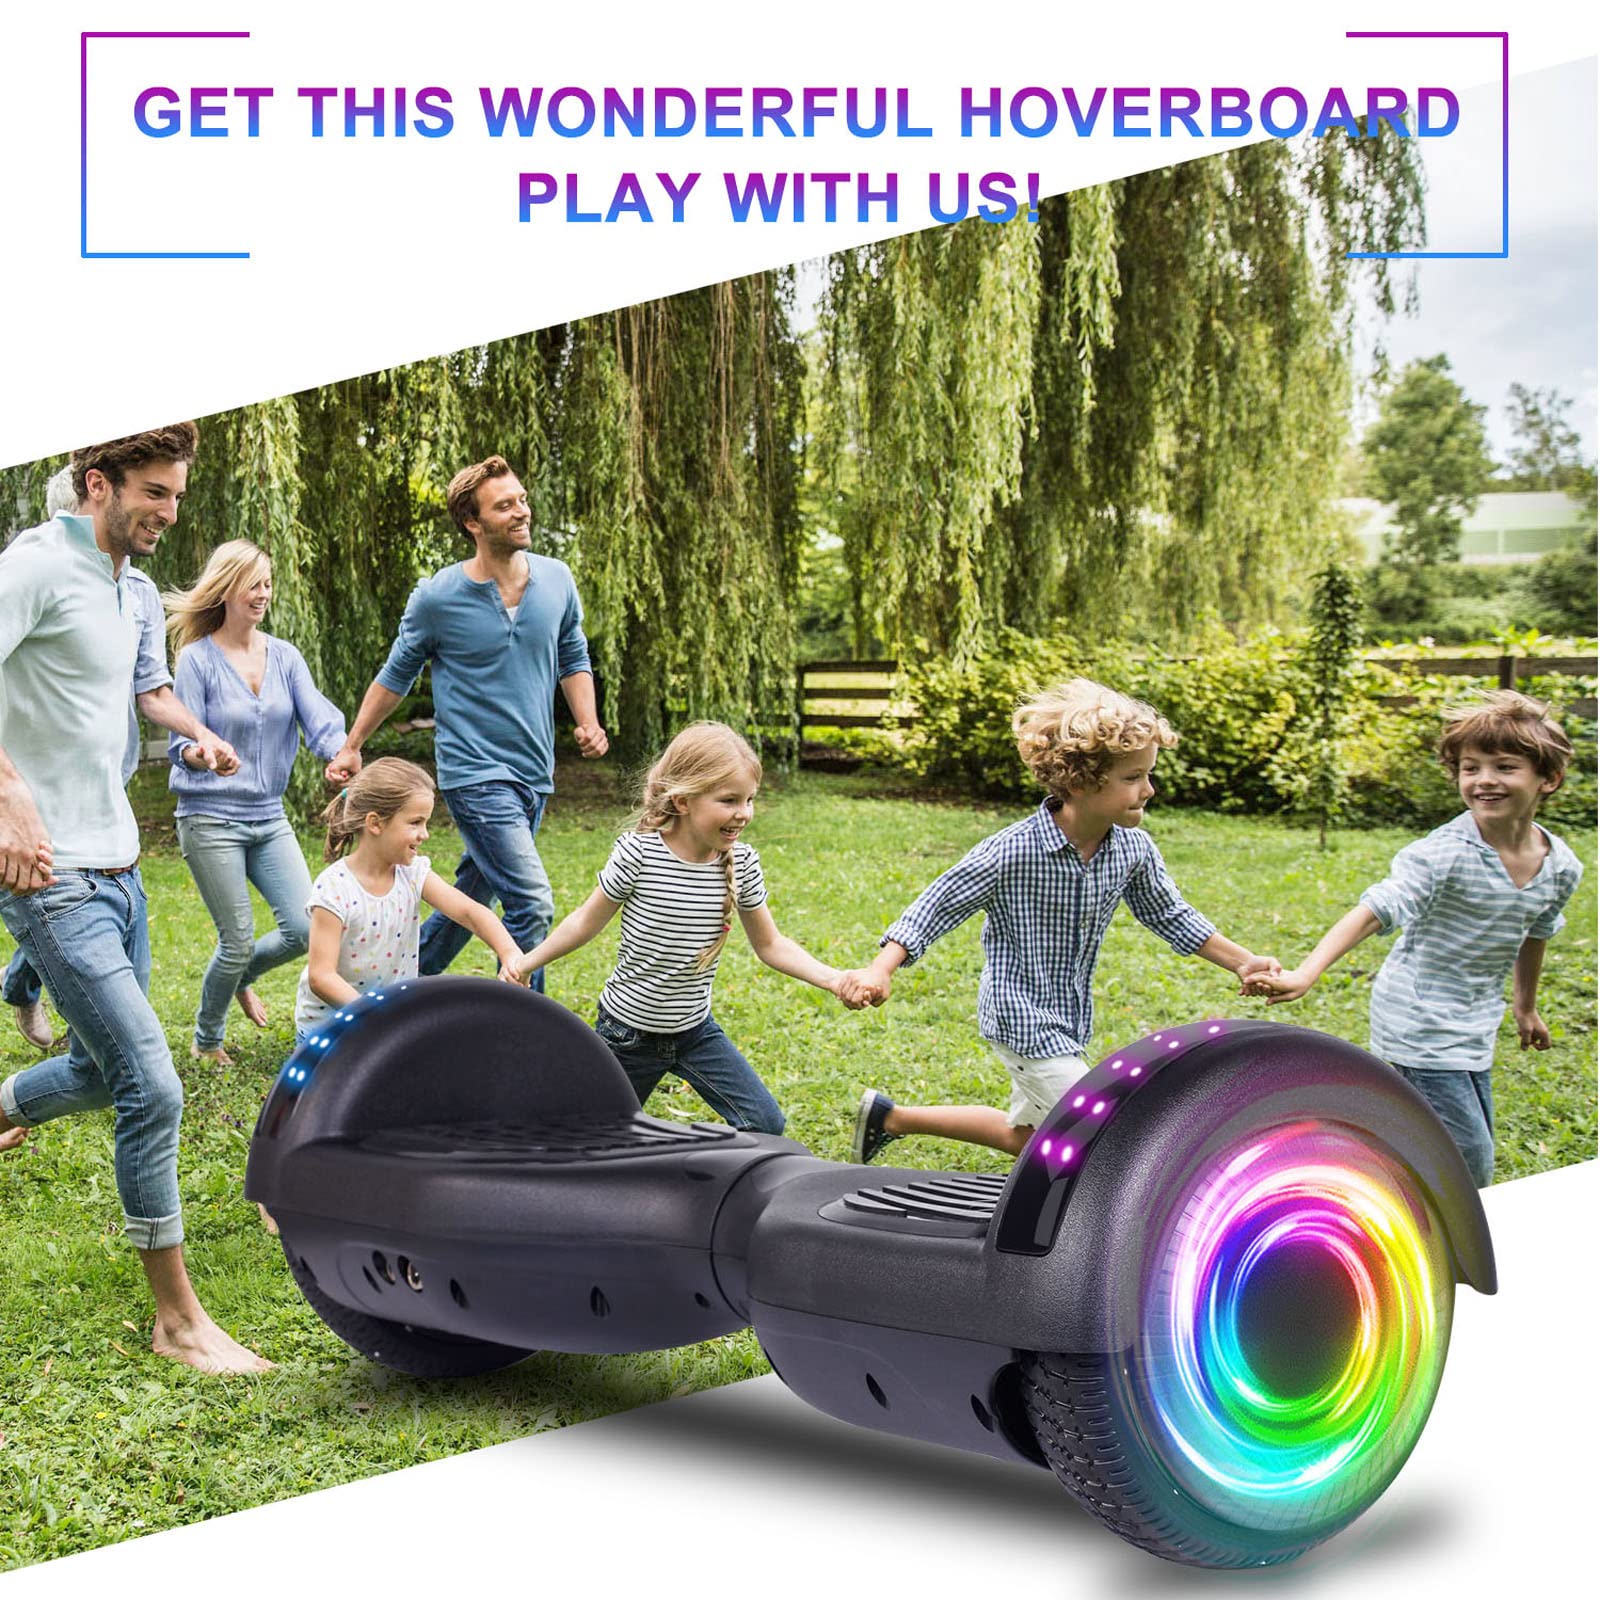 SISIGAD Hoverboard for Kids Ages 6-12, with Built-in Bluetooth Speaker and 6.5